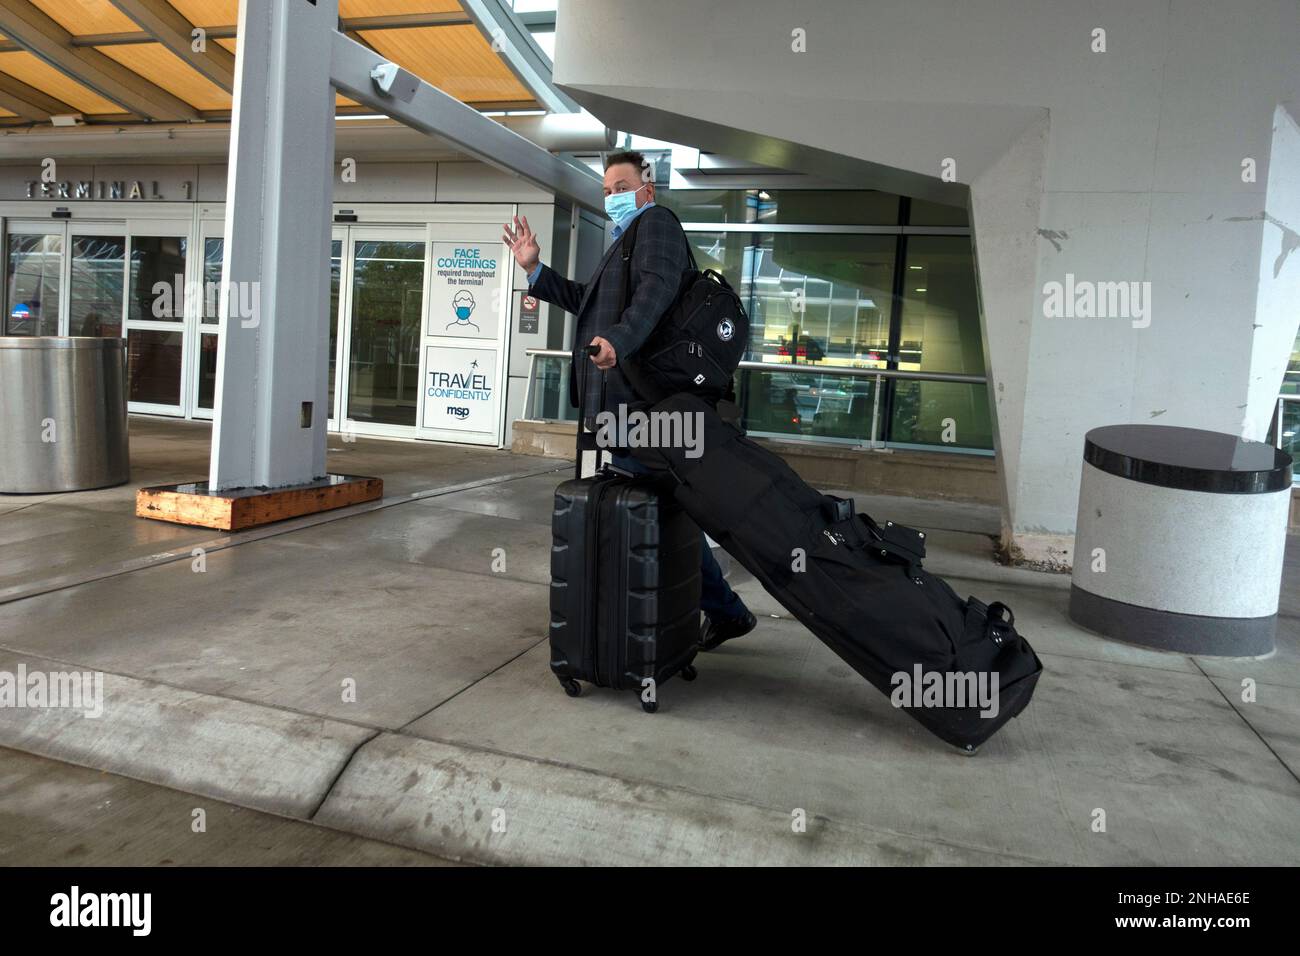 Man wearing a masked for Covid protection with golf clubs and carry-on luggage waving at airport traveling by airplane. Minneapolis Minnesota MN USA Stock Photo